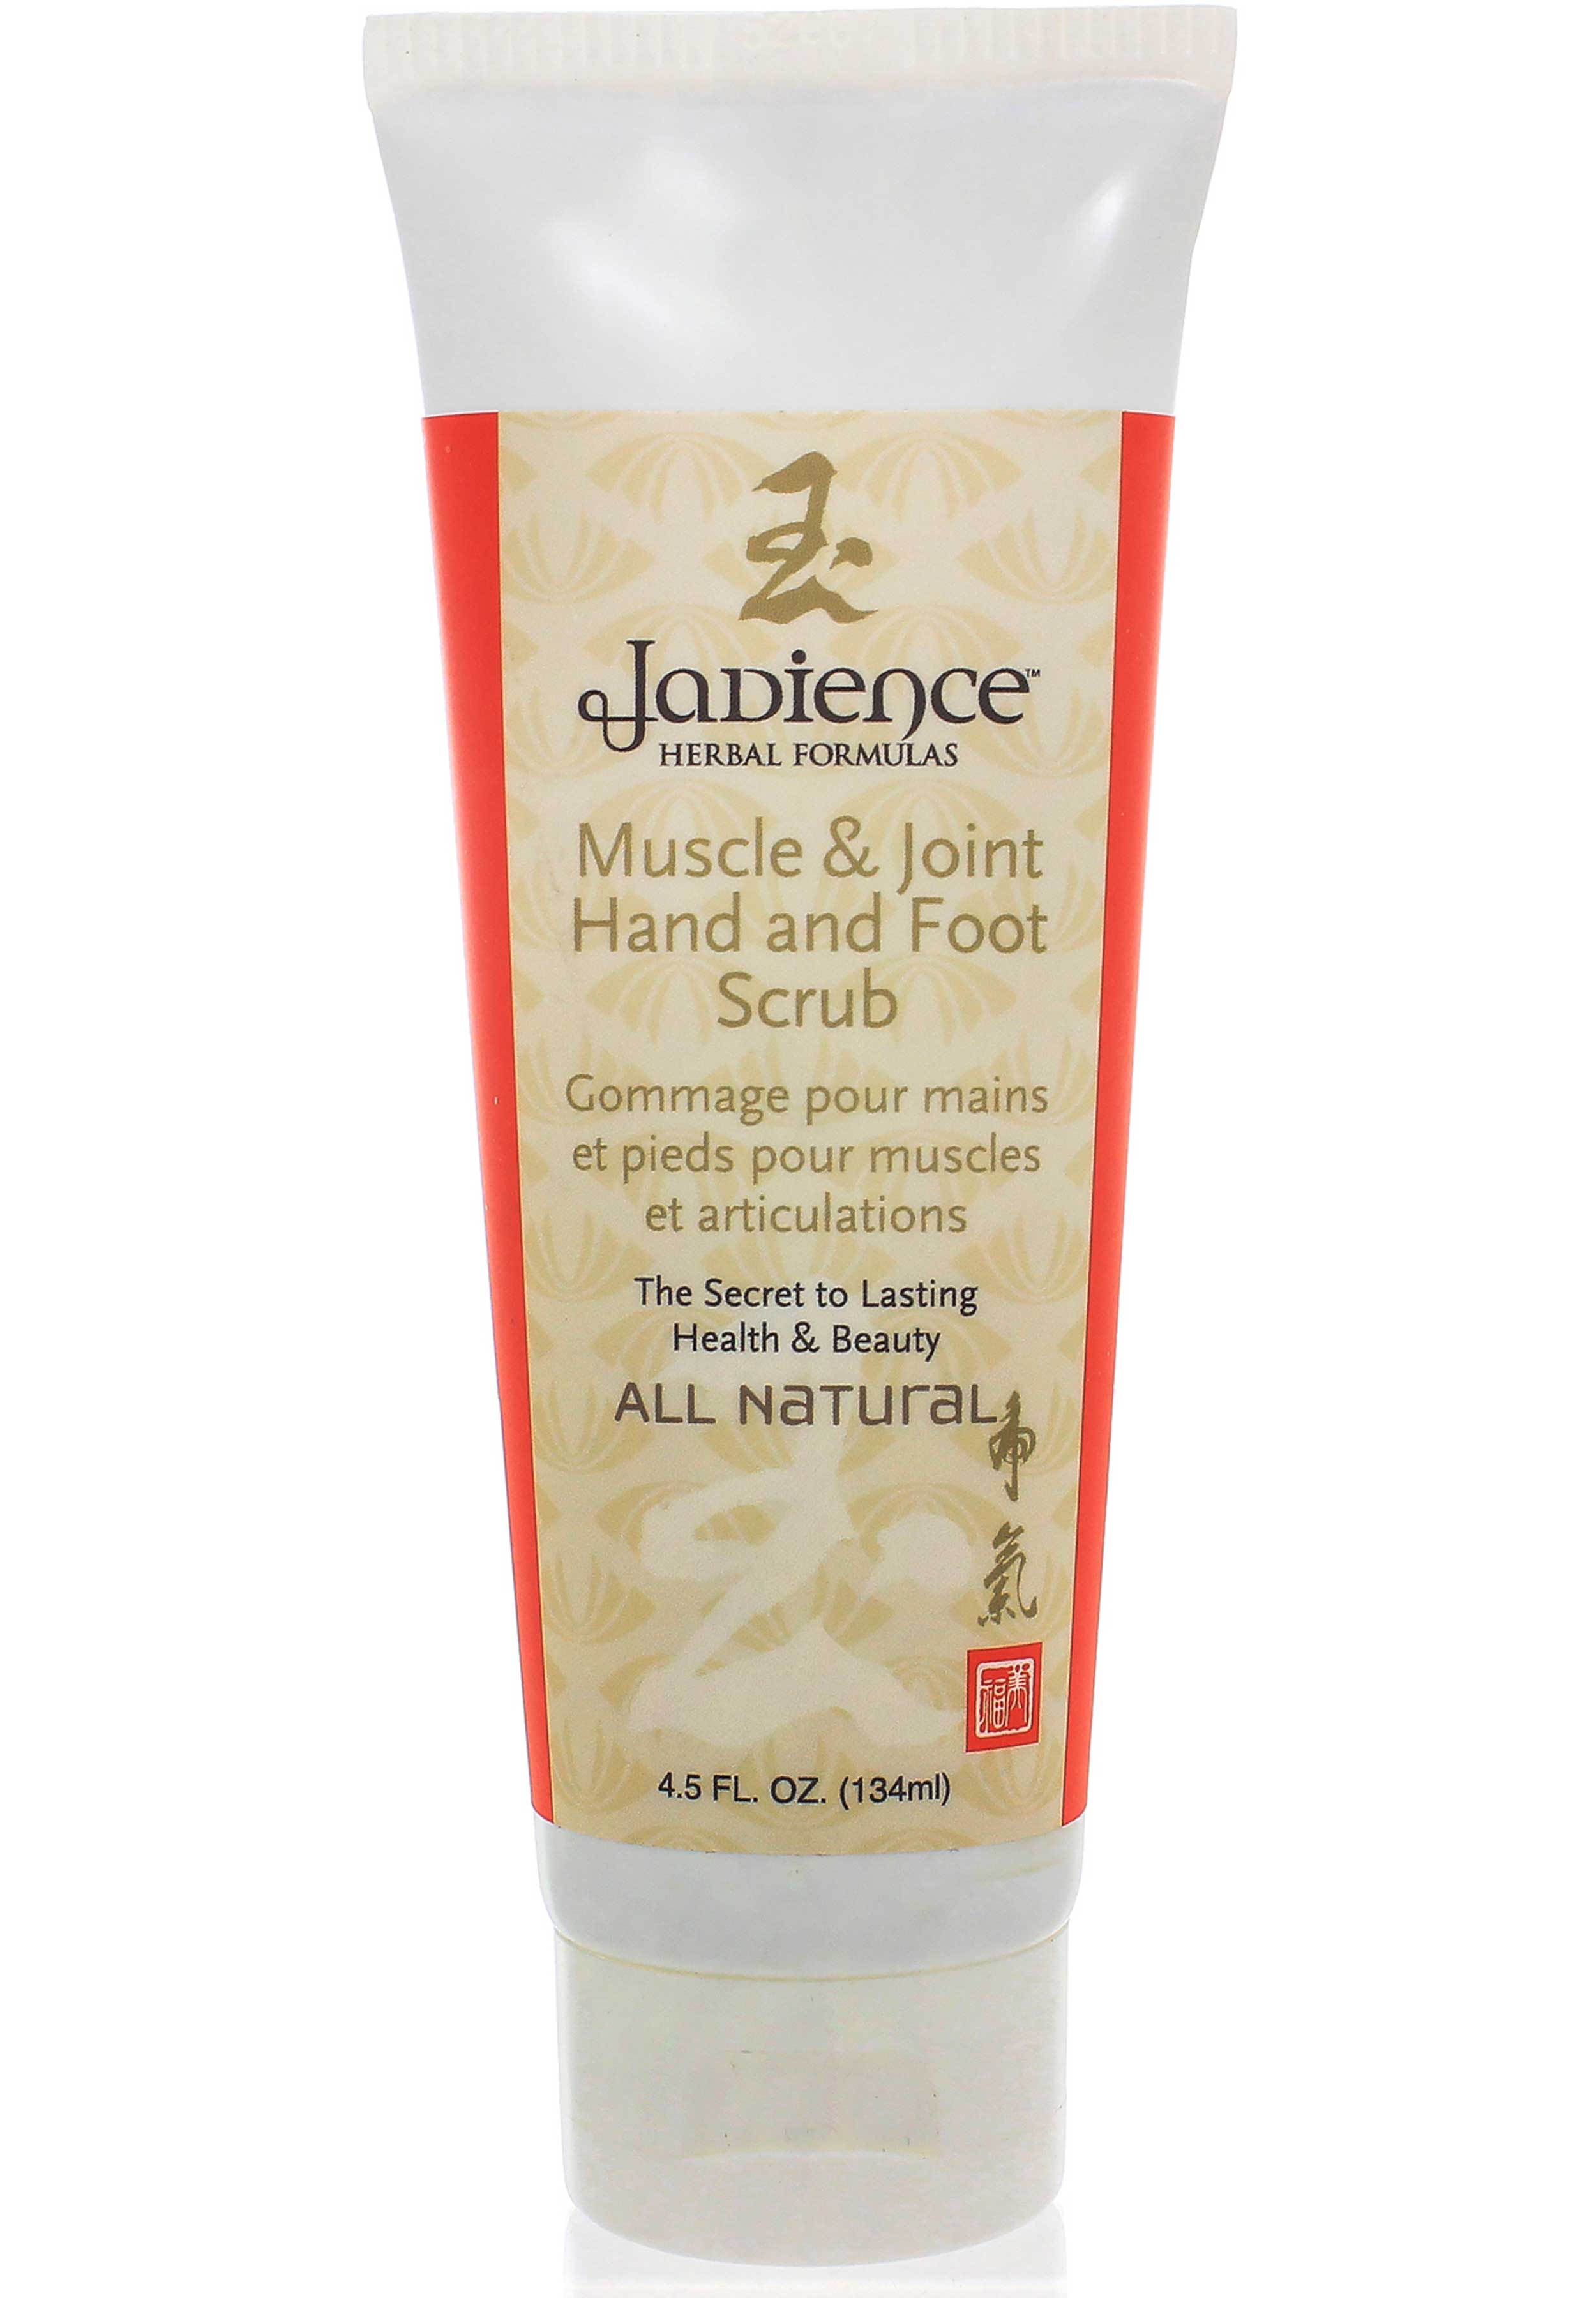 Jadience Herbal Formulas Muscle and Joint Hand and Foot Scrub